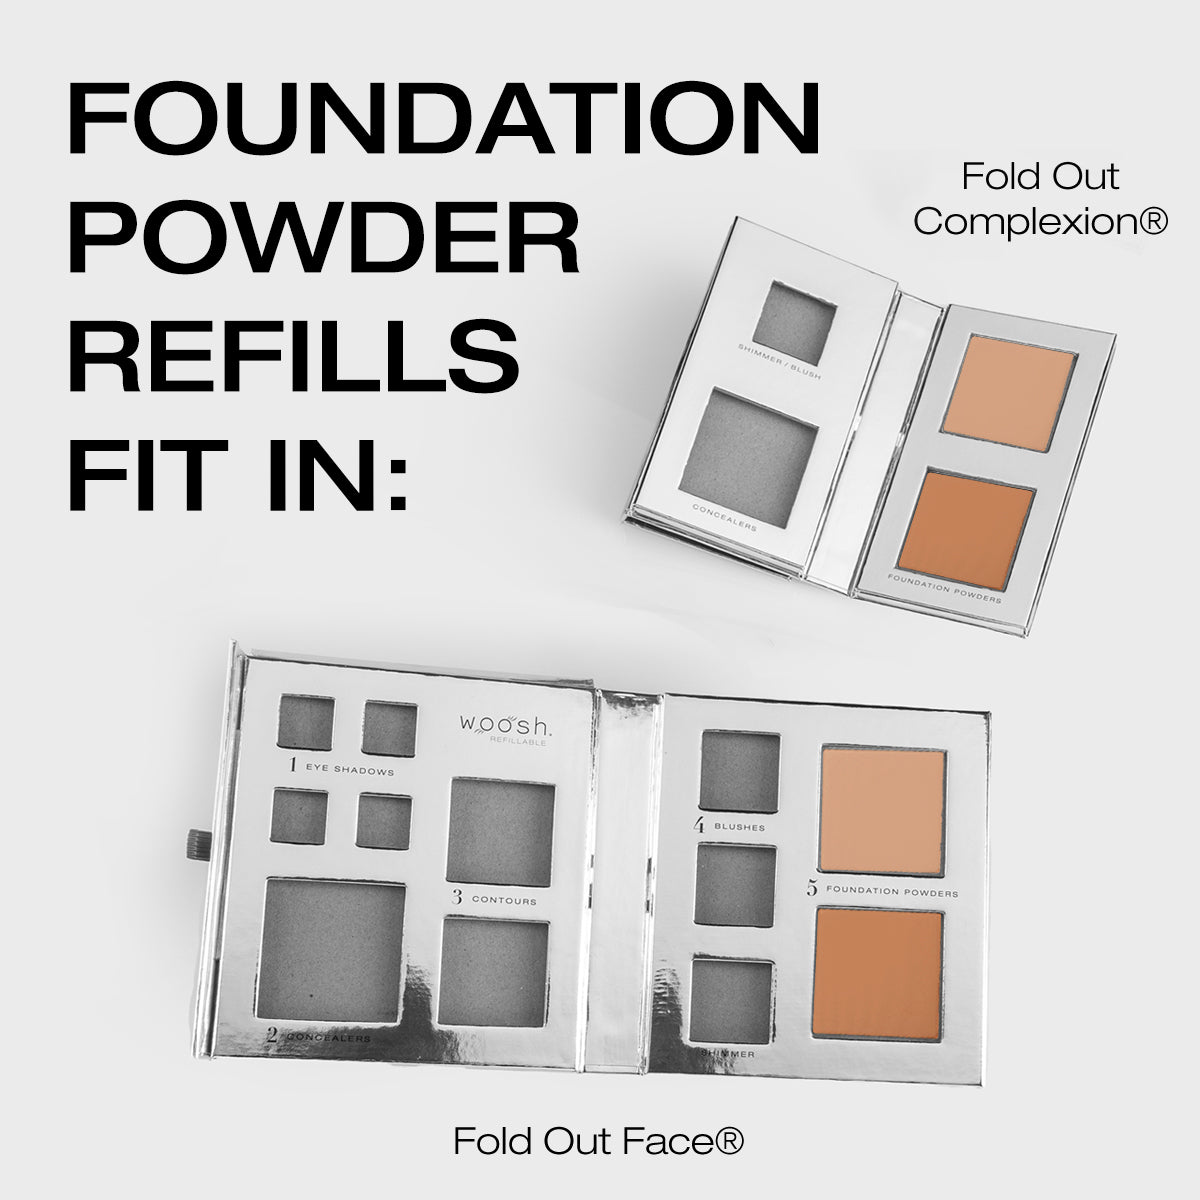 Foundation powder refills fit in the fold out complexion and fold out face